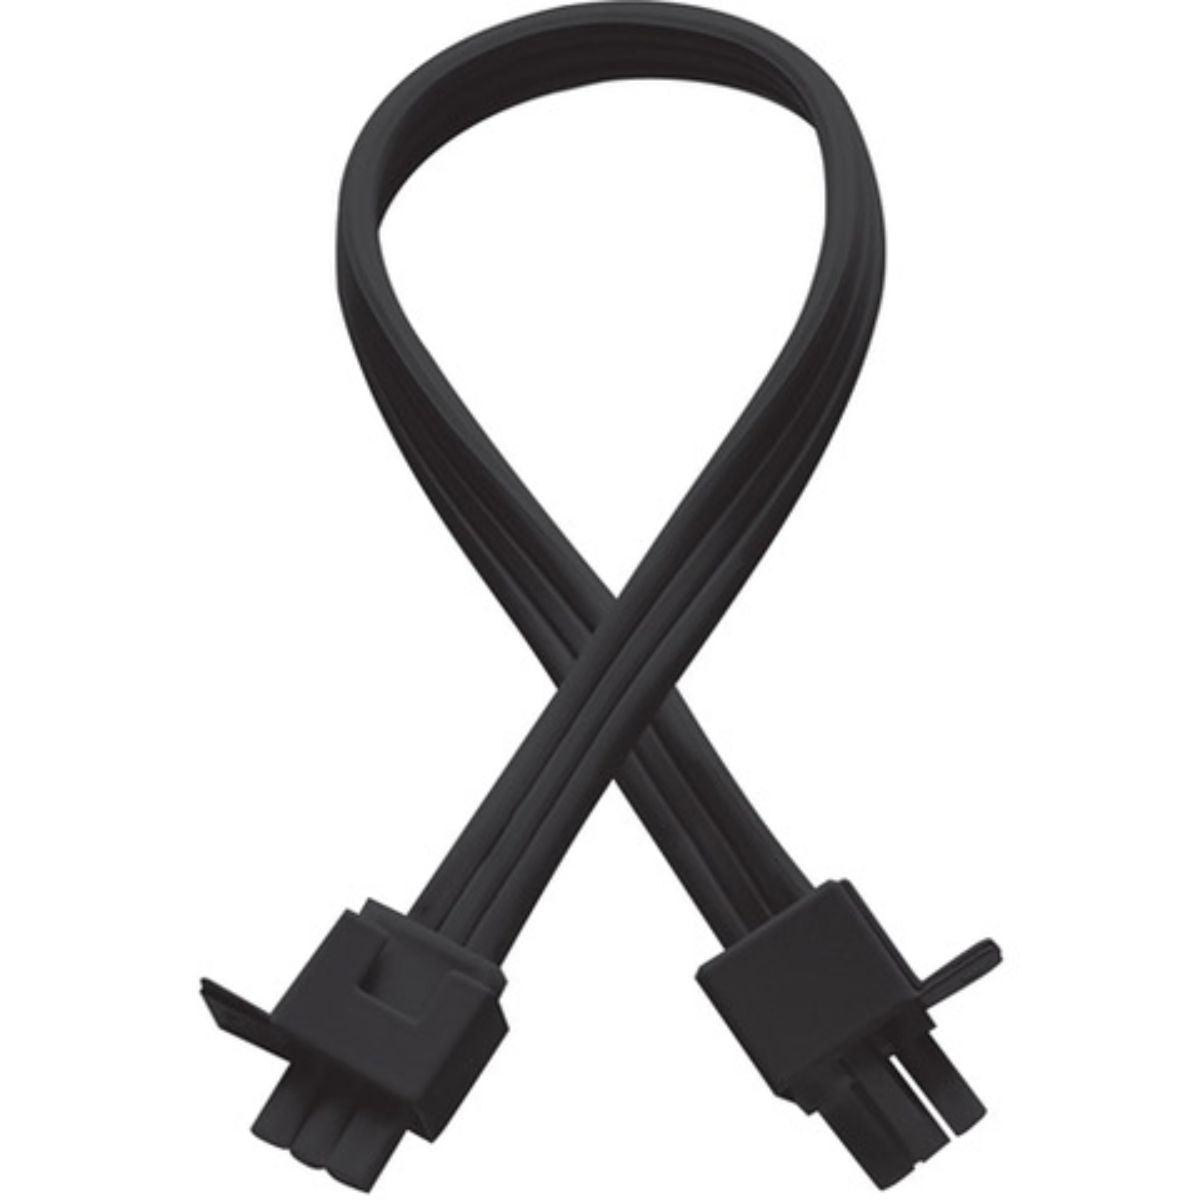 24in. Interconnect Cable For Undercabinet Lights, Black Finish